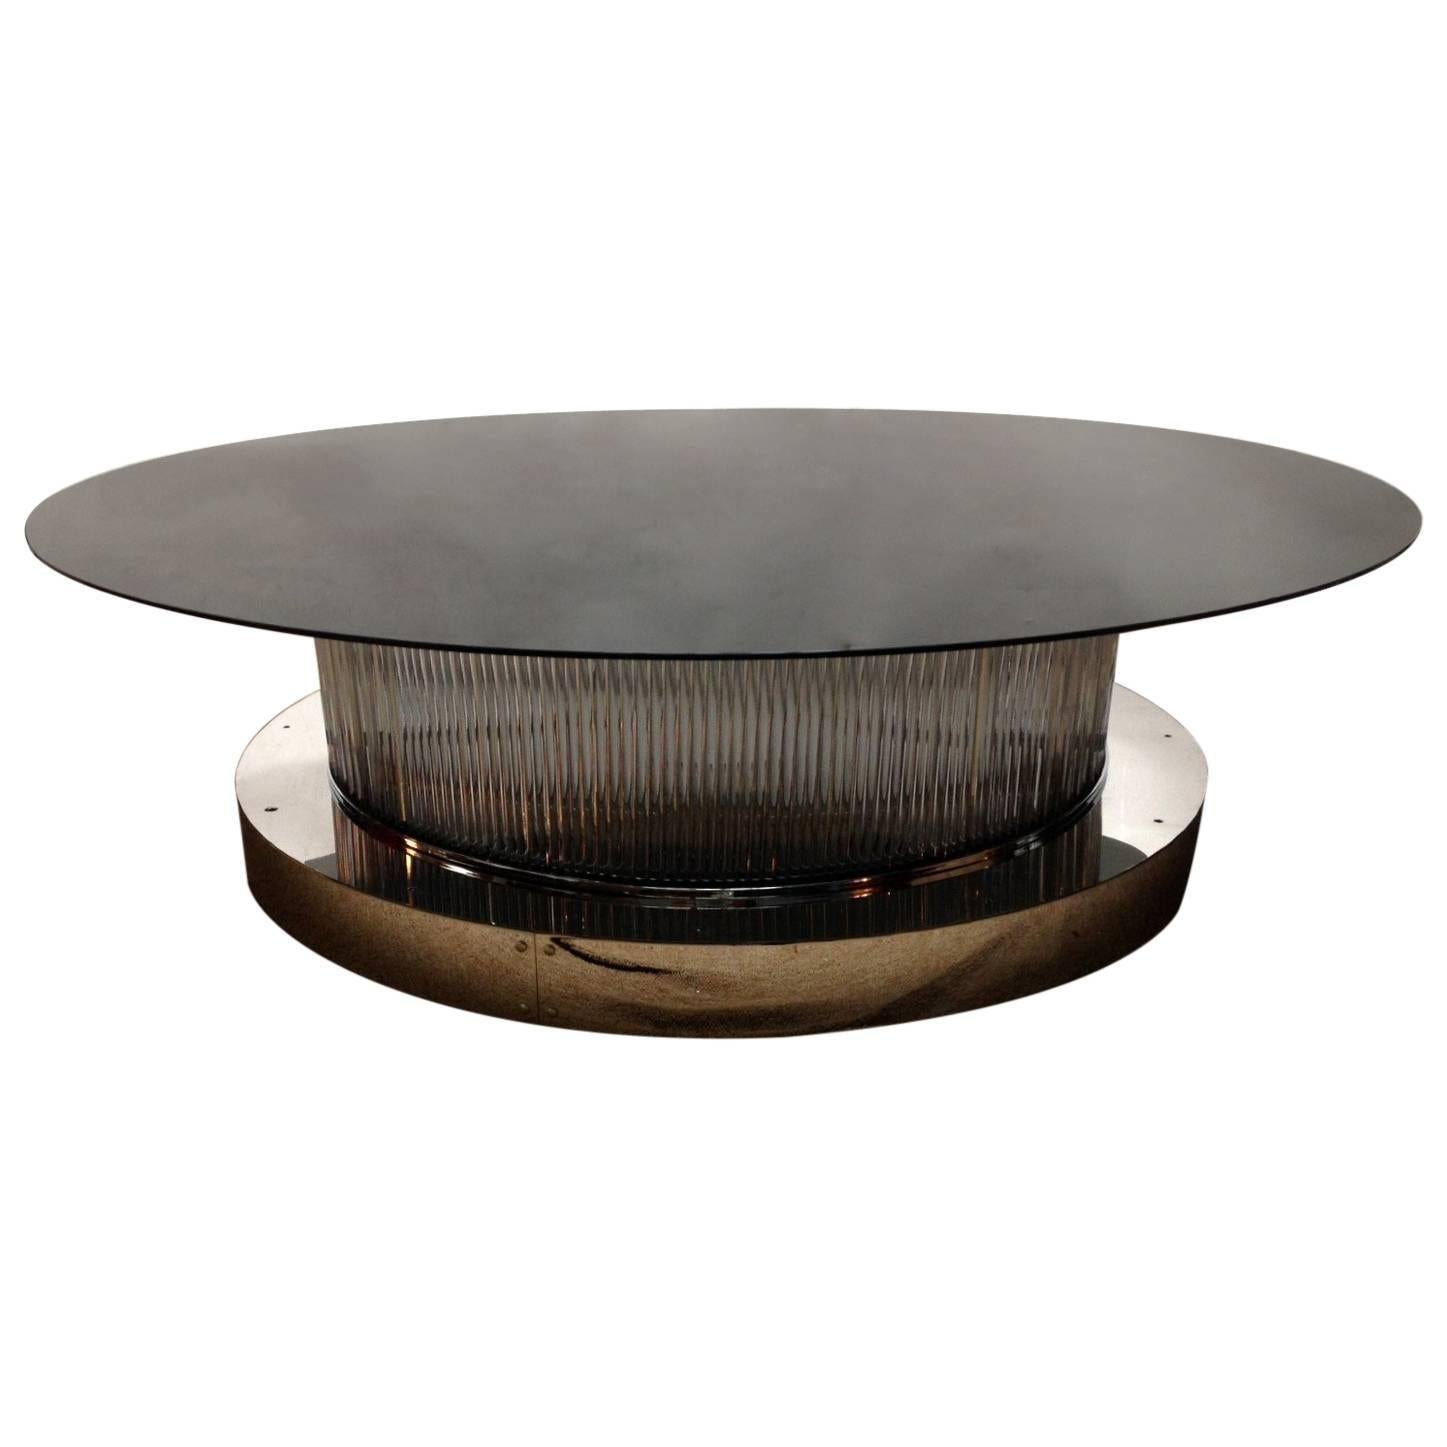 One of a kind Italian over sized crystal bars coffee table with chrome base and glass top. This table can be lit up from inside with its six standard light sockets wired for the U.S. / Made in Italy circa 1990s

Top glass diameter is 60 inches /